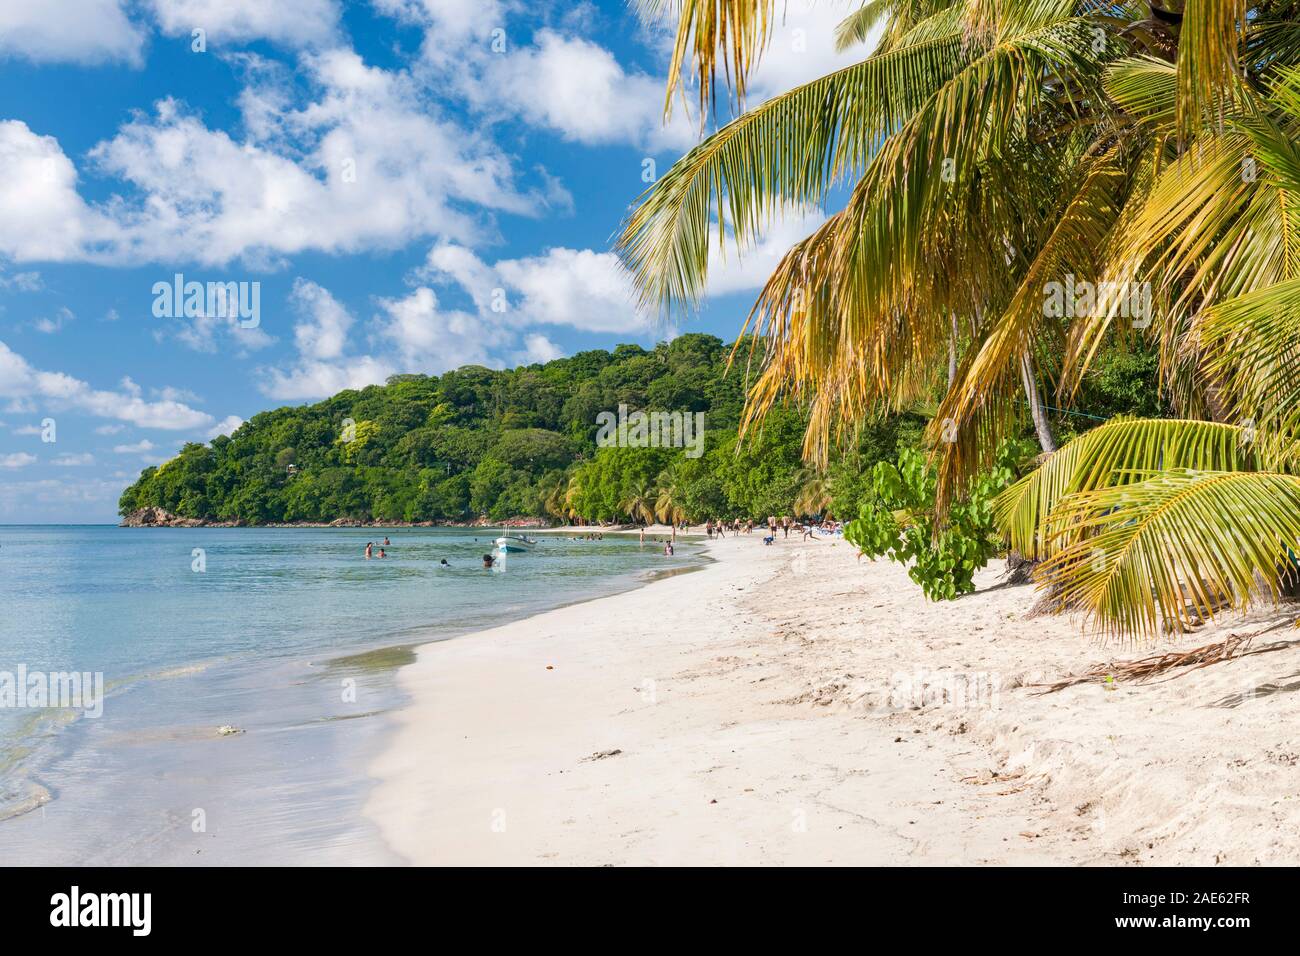 The beach at Southwest Bay on Providencia island, Colombia. Stock Photo